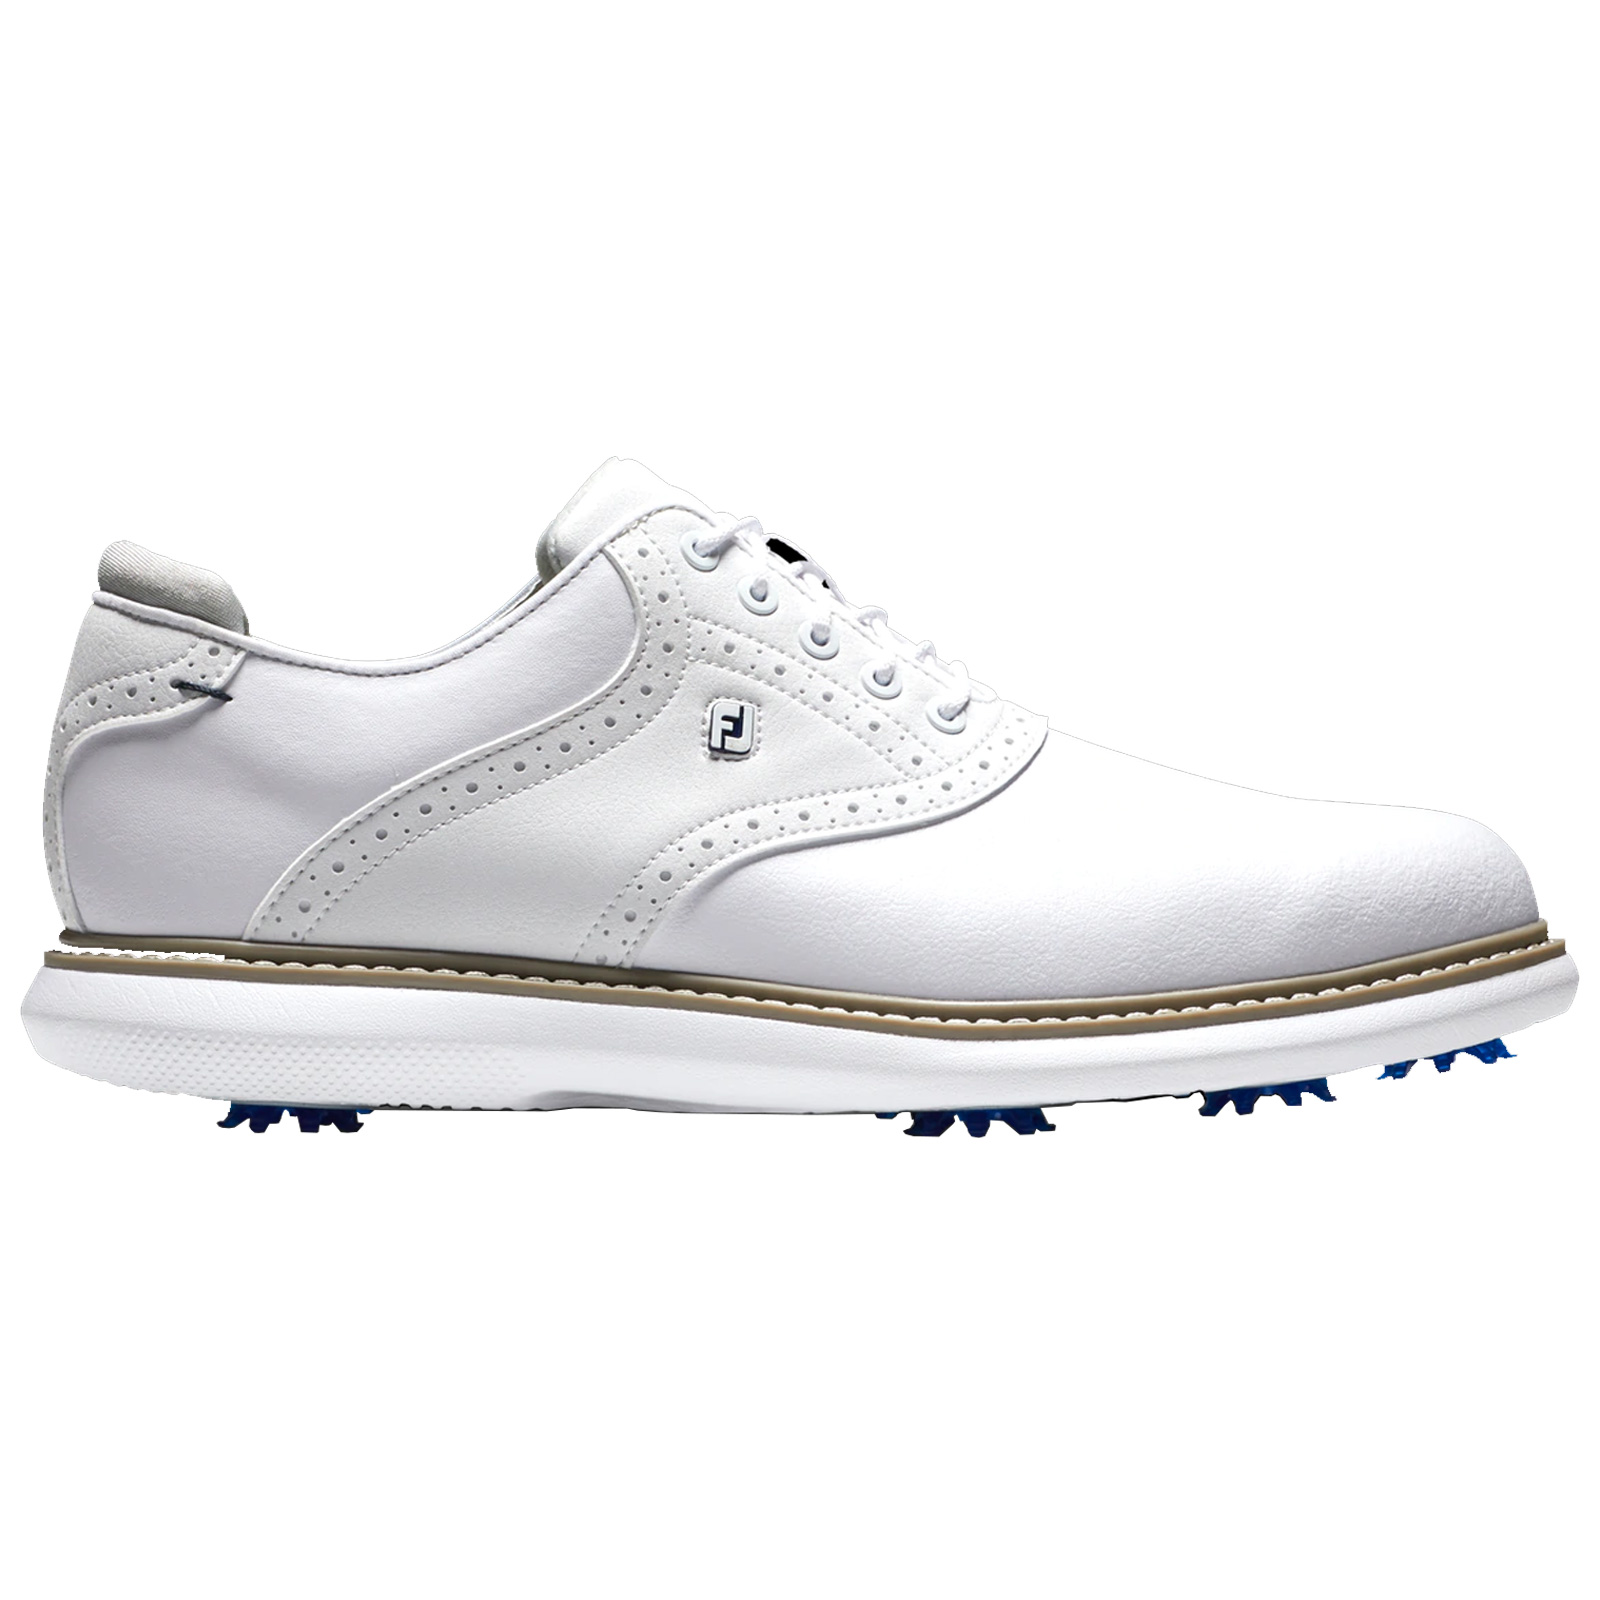 FOOTJOY MENS TRADITIONS Waterproof Golf Shoes Lightweight Leather ...